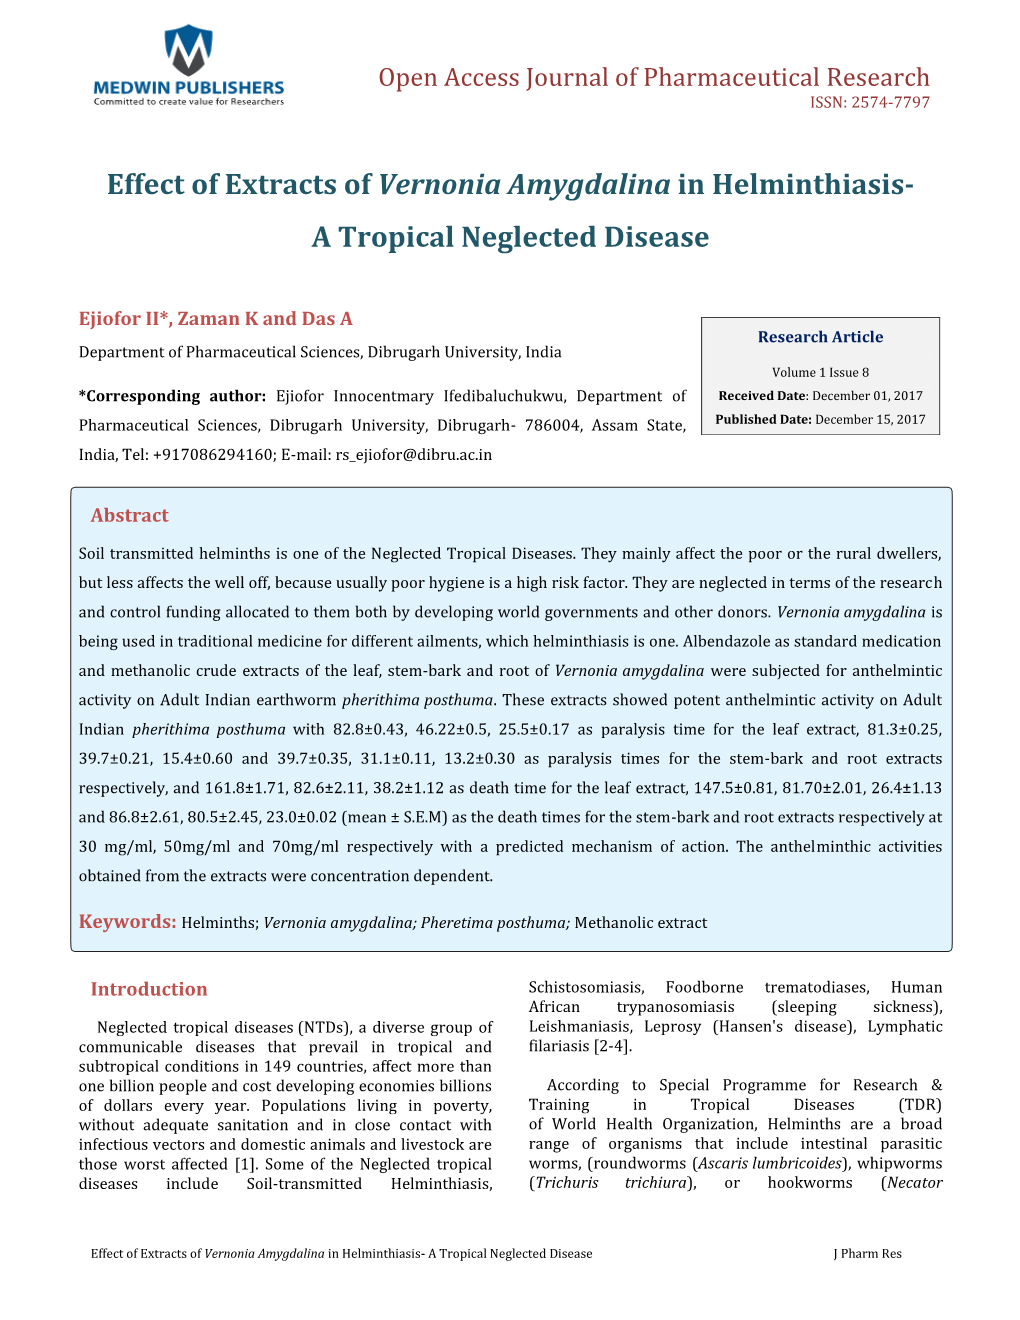 Effect of Extracts of Vernonia Amygdalina in Helminthiasis- a Tropical Neglected Disease